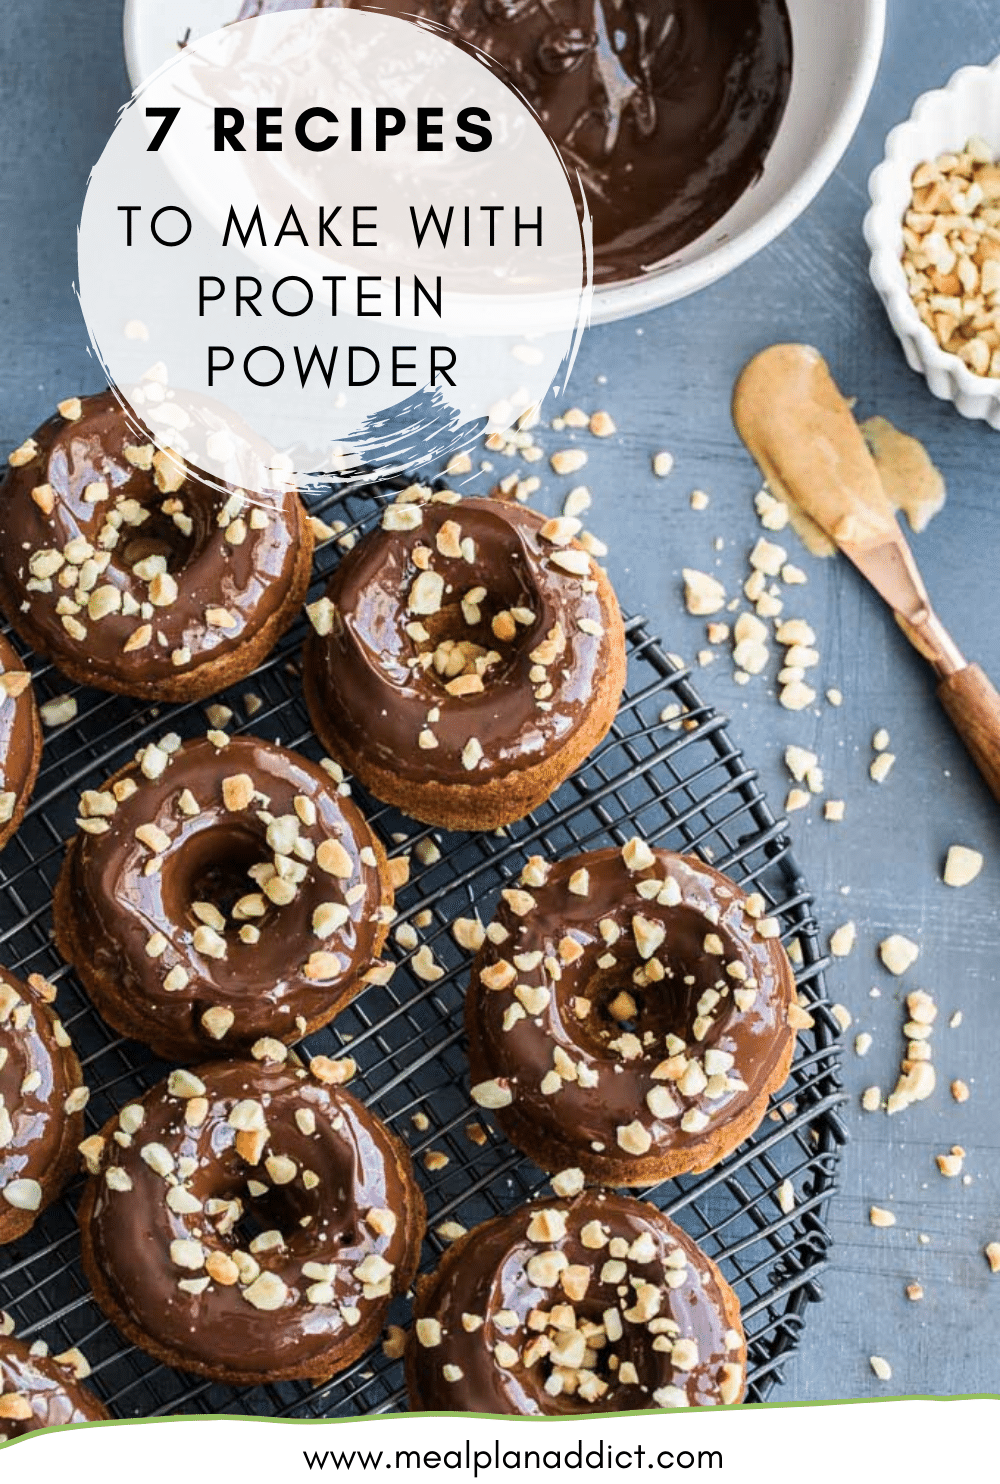 7 Recipes to make with protein powder